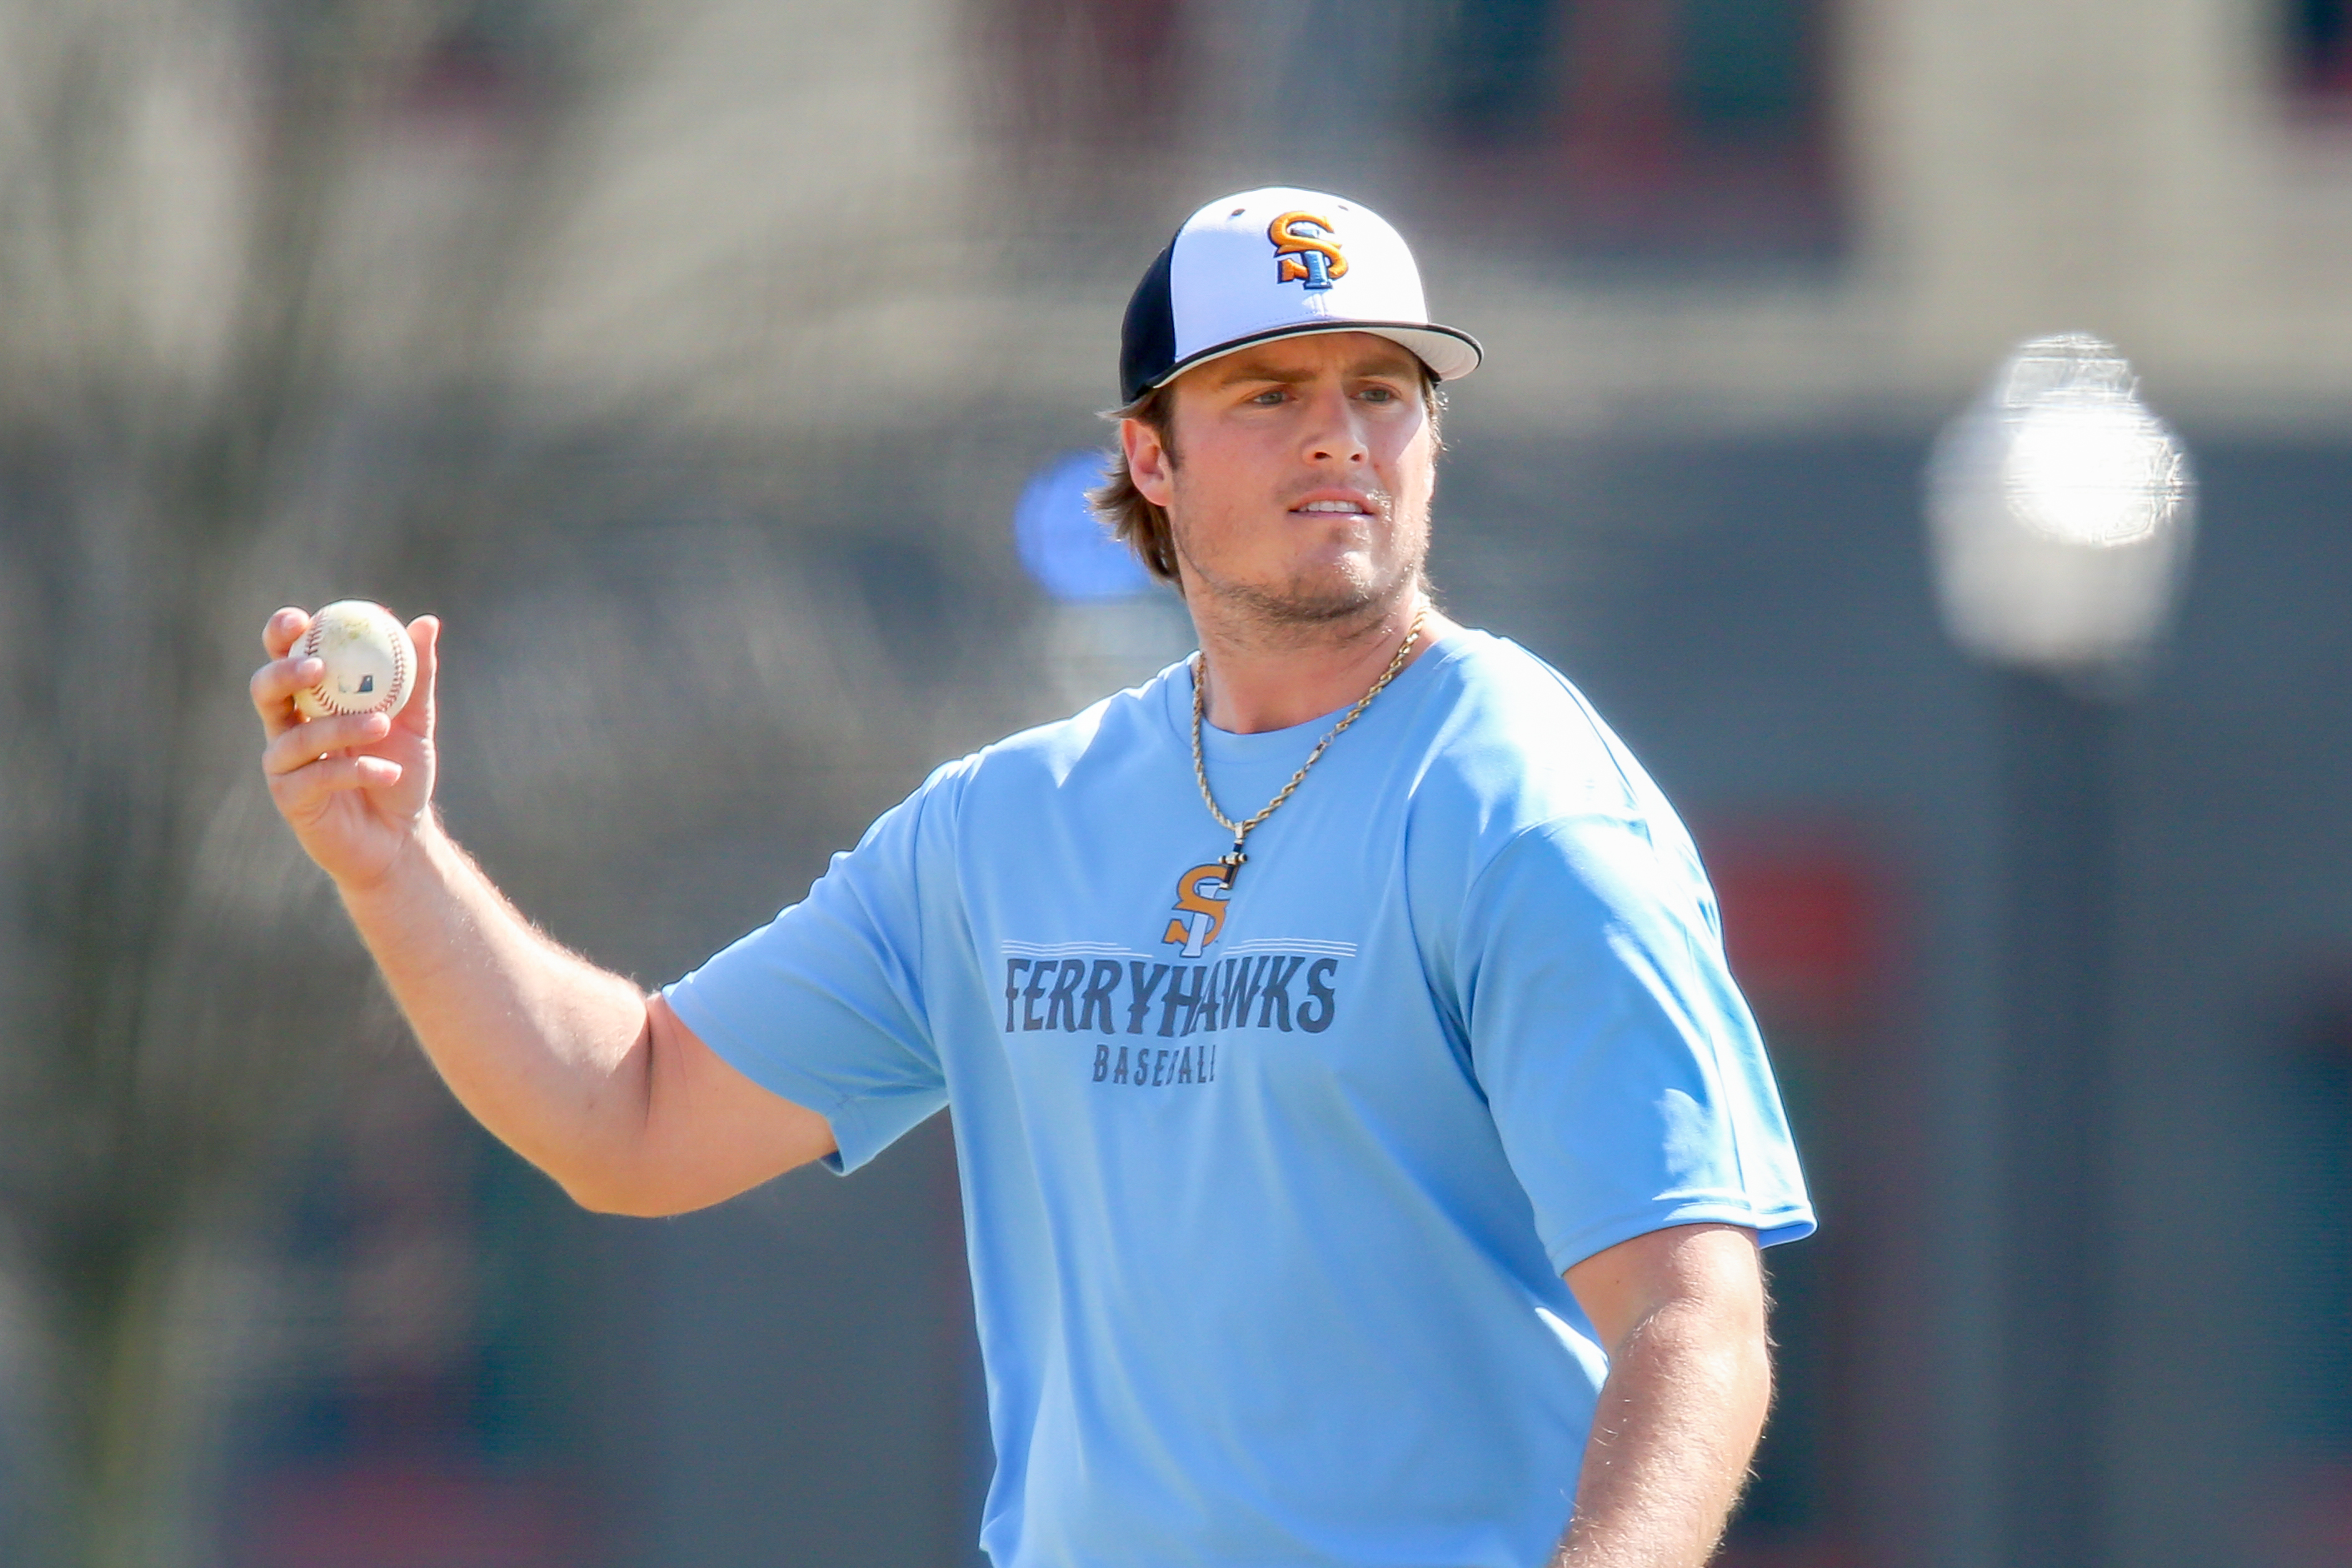 Roger Clemens 'thrilled' as son Kody Clemens makes MLB debut in